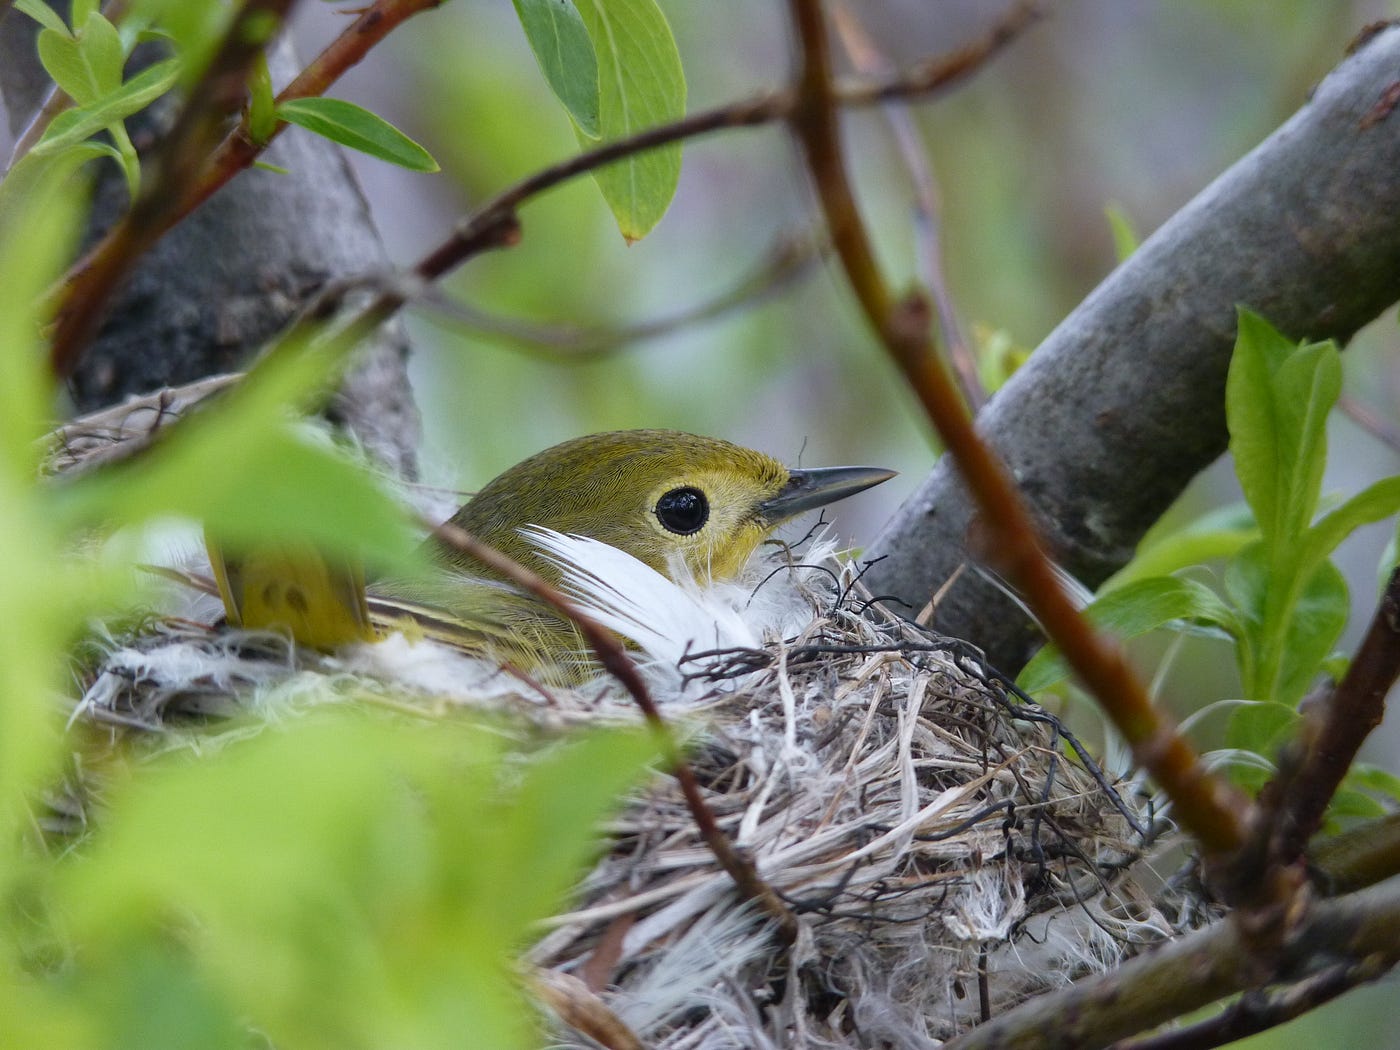 A yellow warbler looks out from its nest in a tree